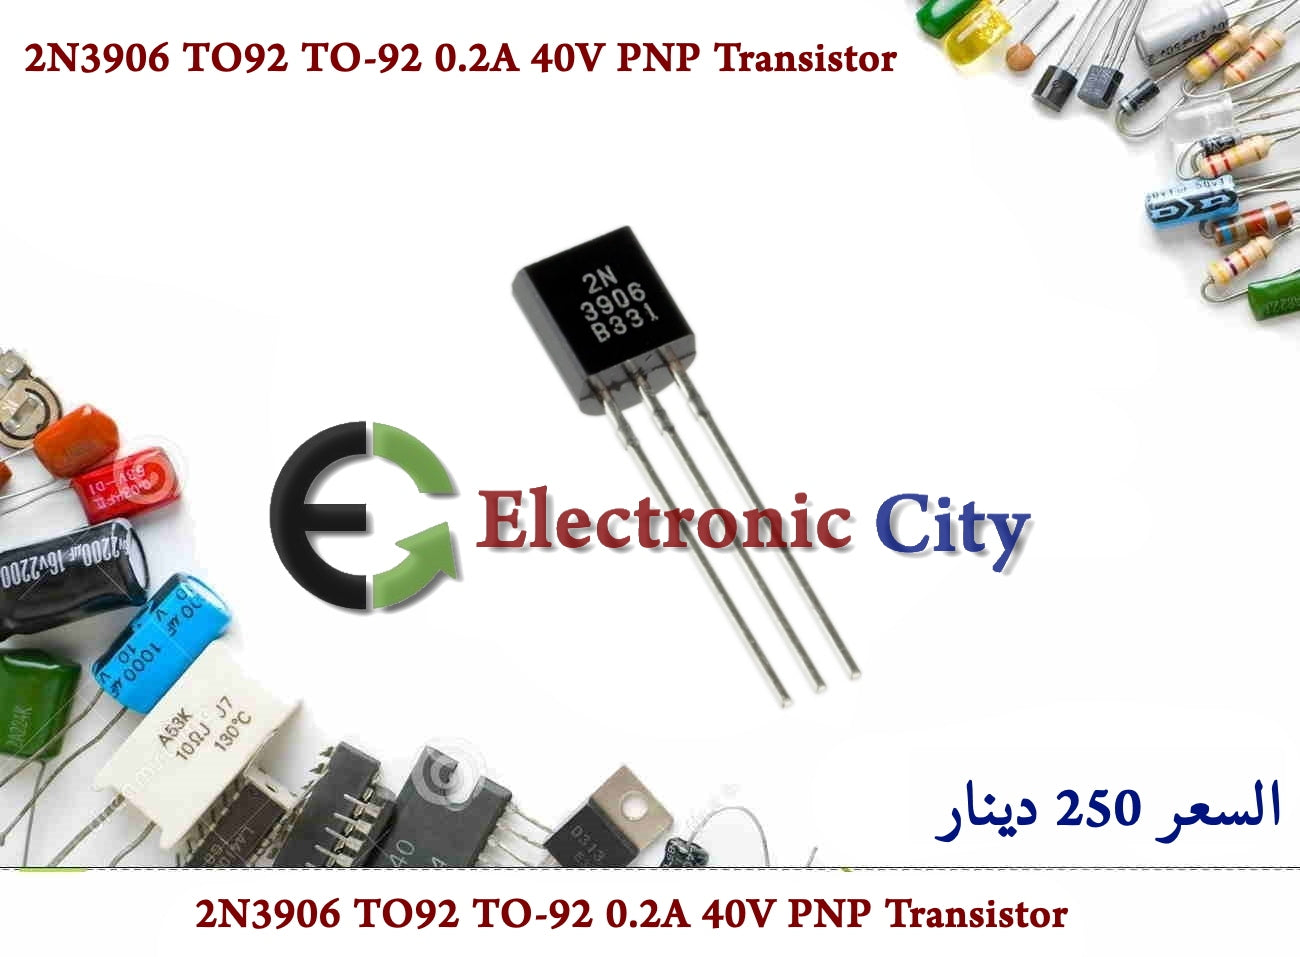 2N3906 TO92 TO-92 0.2A 40V PNP Transistor